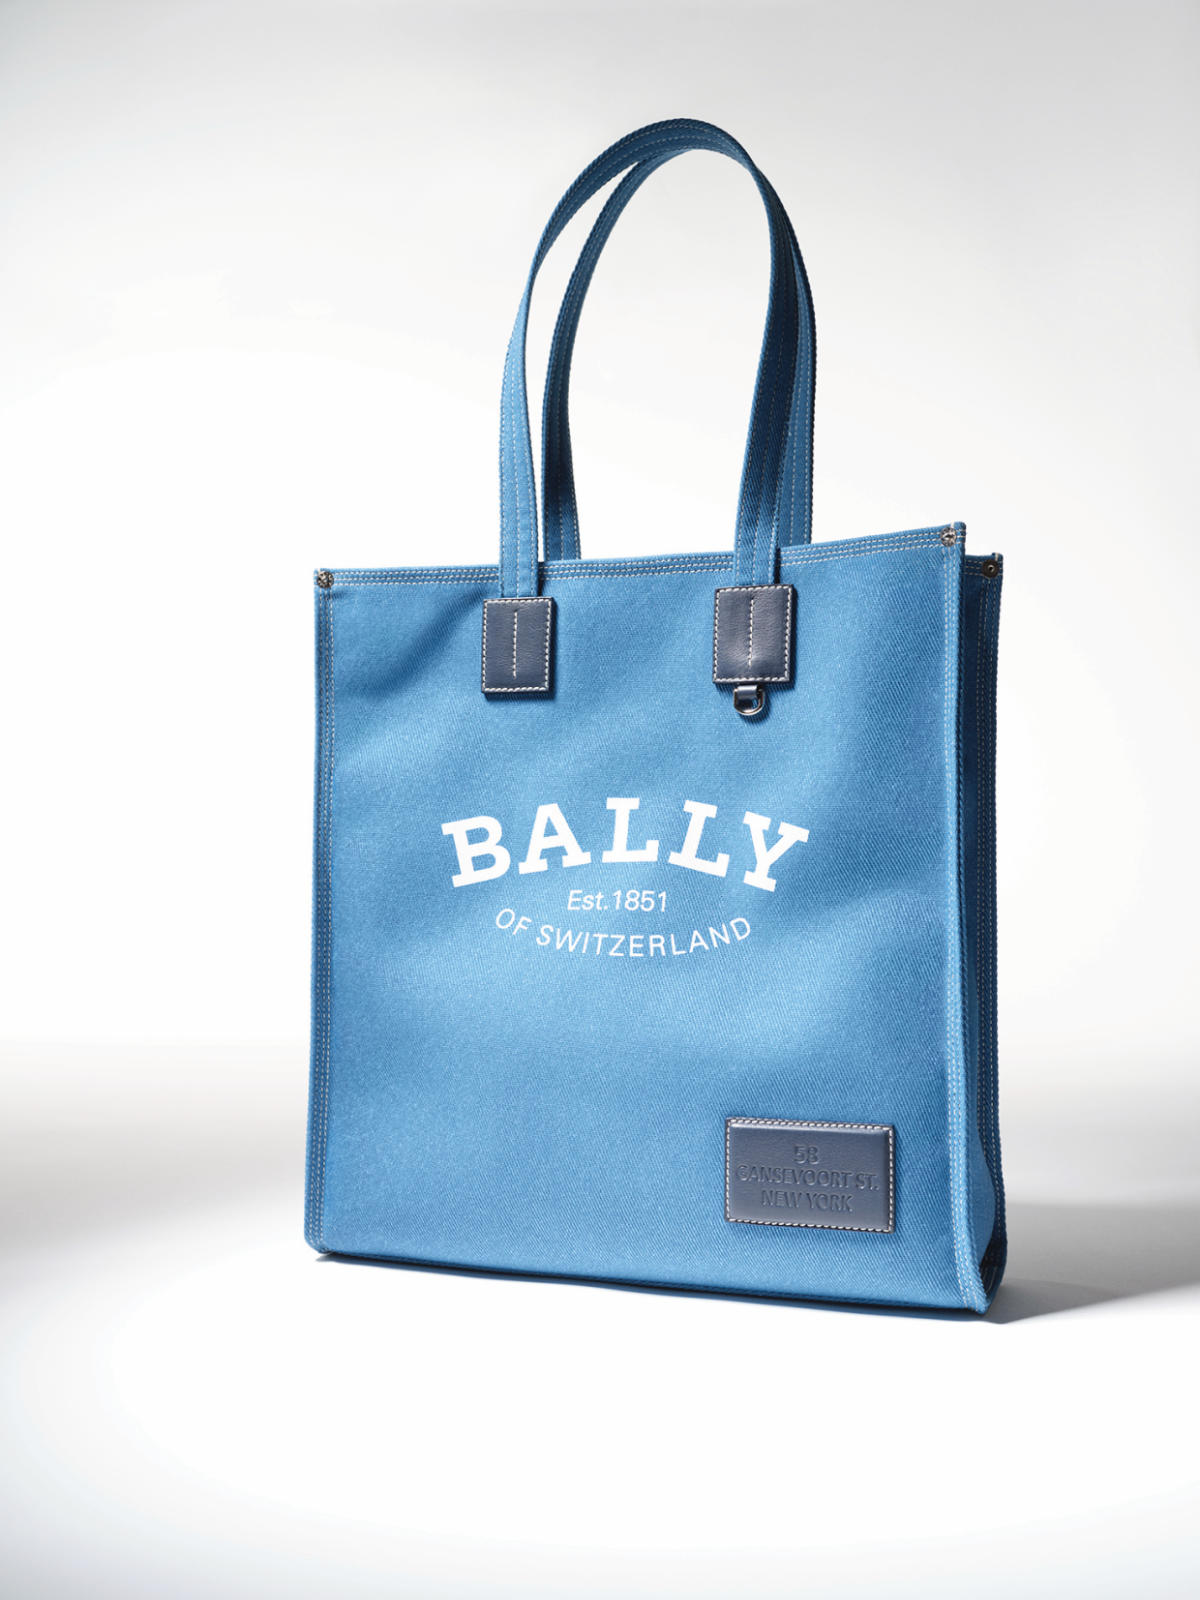 Bally Opens Its NY Flagship Downtown With a ‘Bally Haus’ Concept in Manhattan’s Meatpacking District